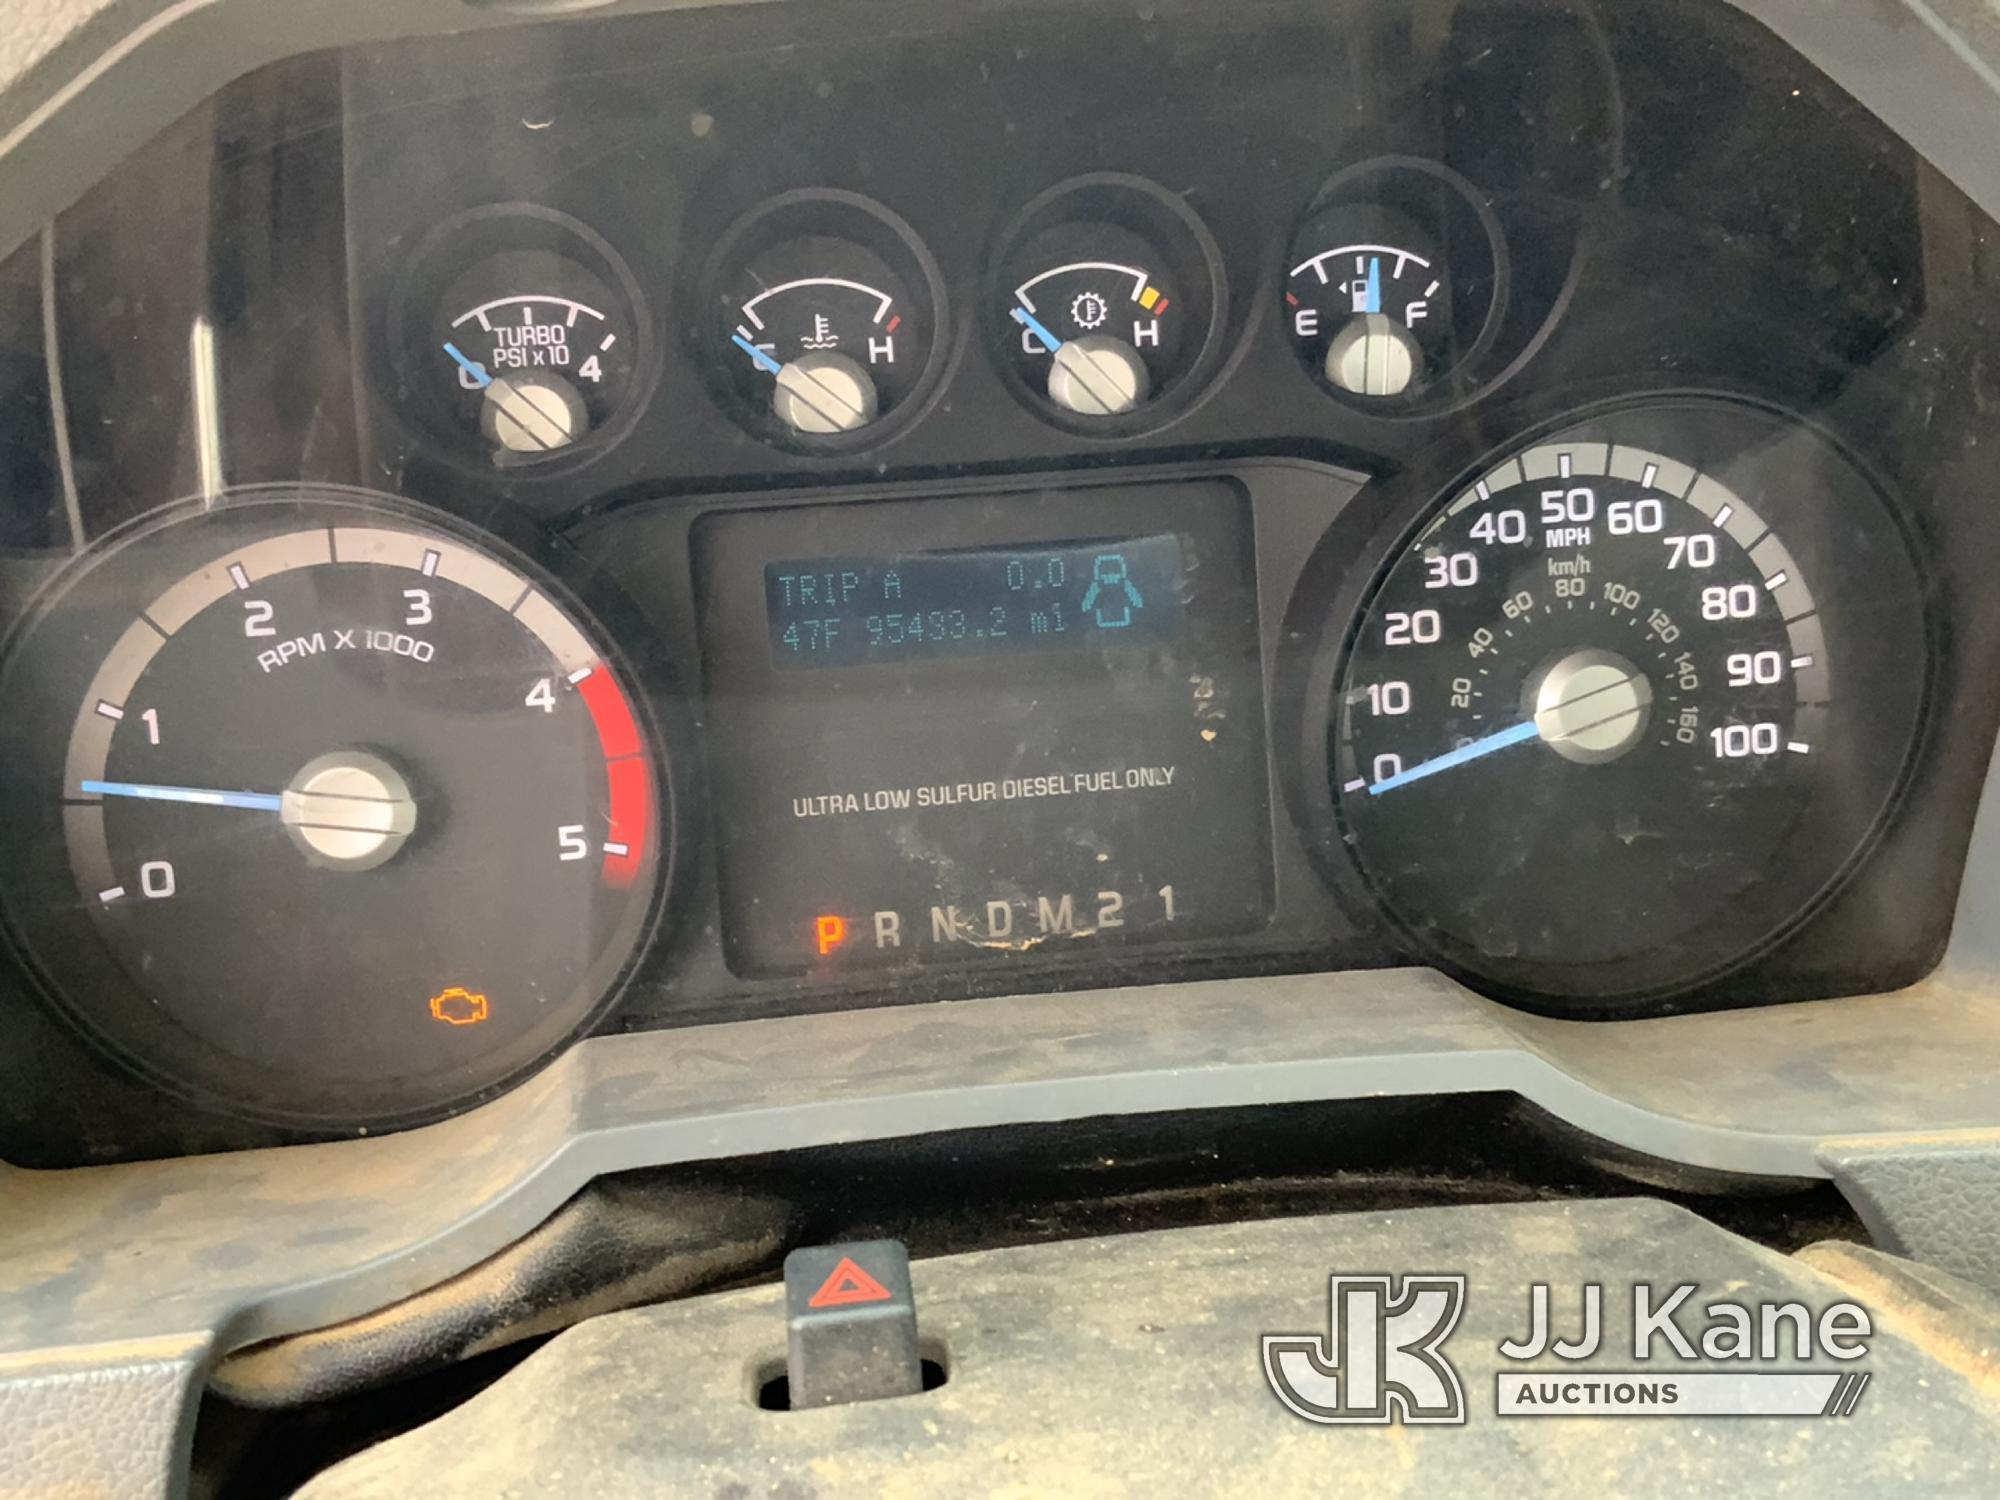 (Shelby, NC) 2016 Ford F250 Service Truck Runs & Moves) (Check Engine Light On)